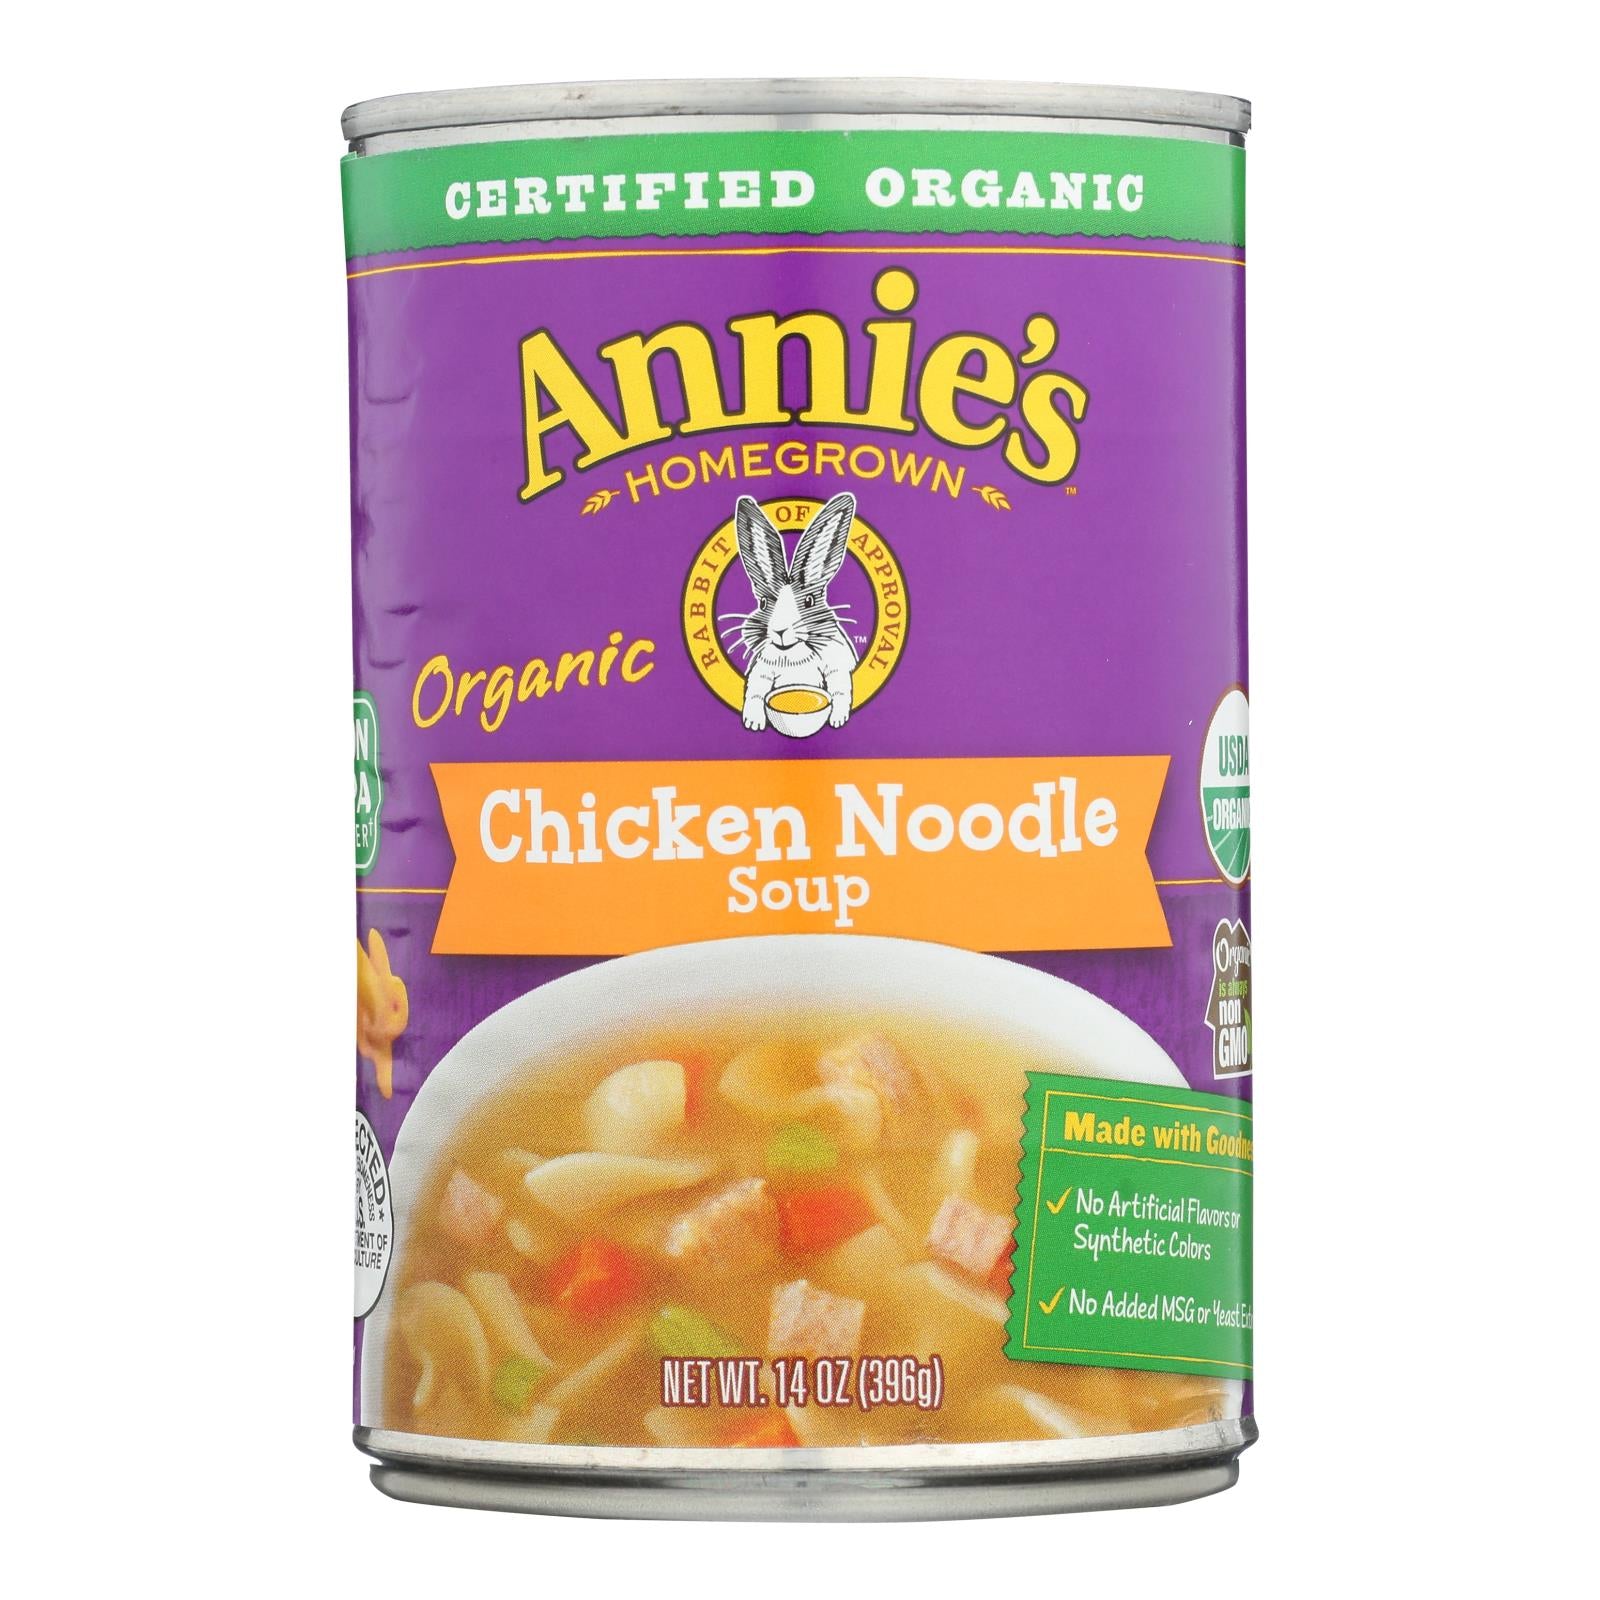 Annie'S Homegrown, Annie's Homegrown - Organic Soup - Chicken Noodle - Case of 8 - 14 oz. (Pack of 8)